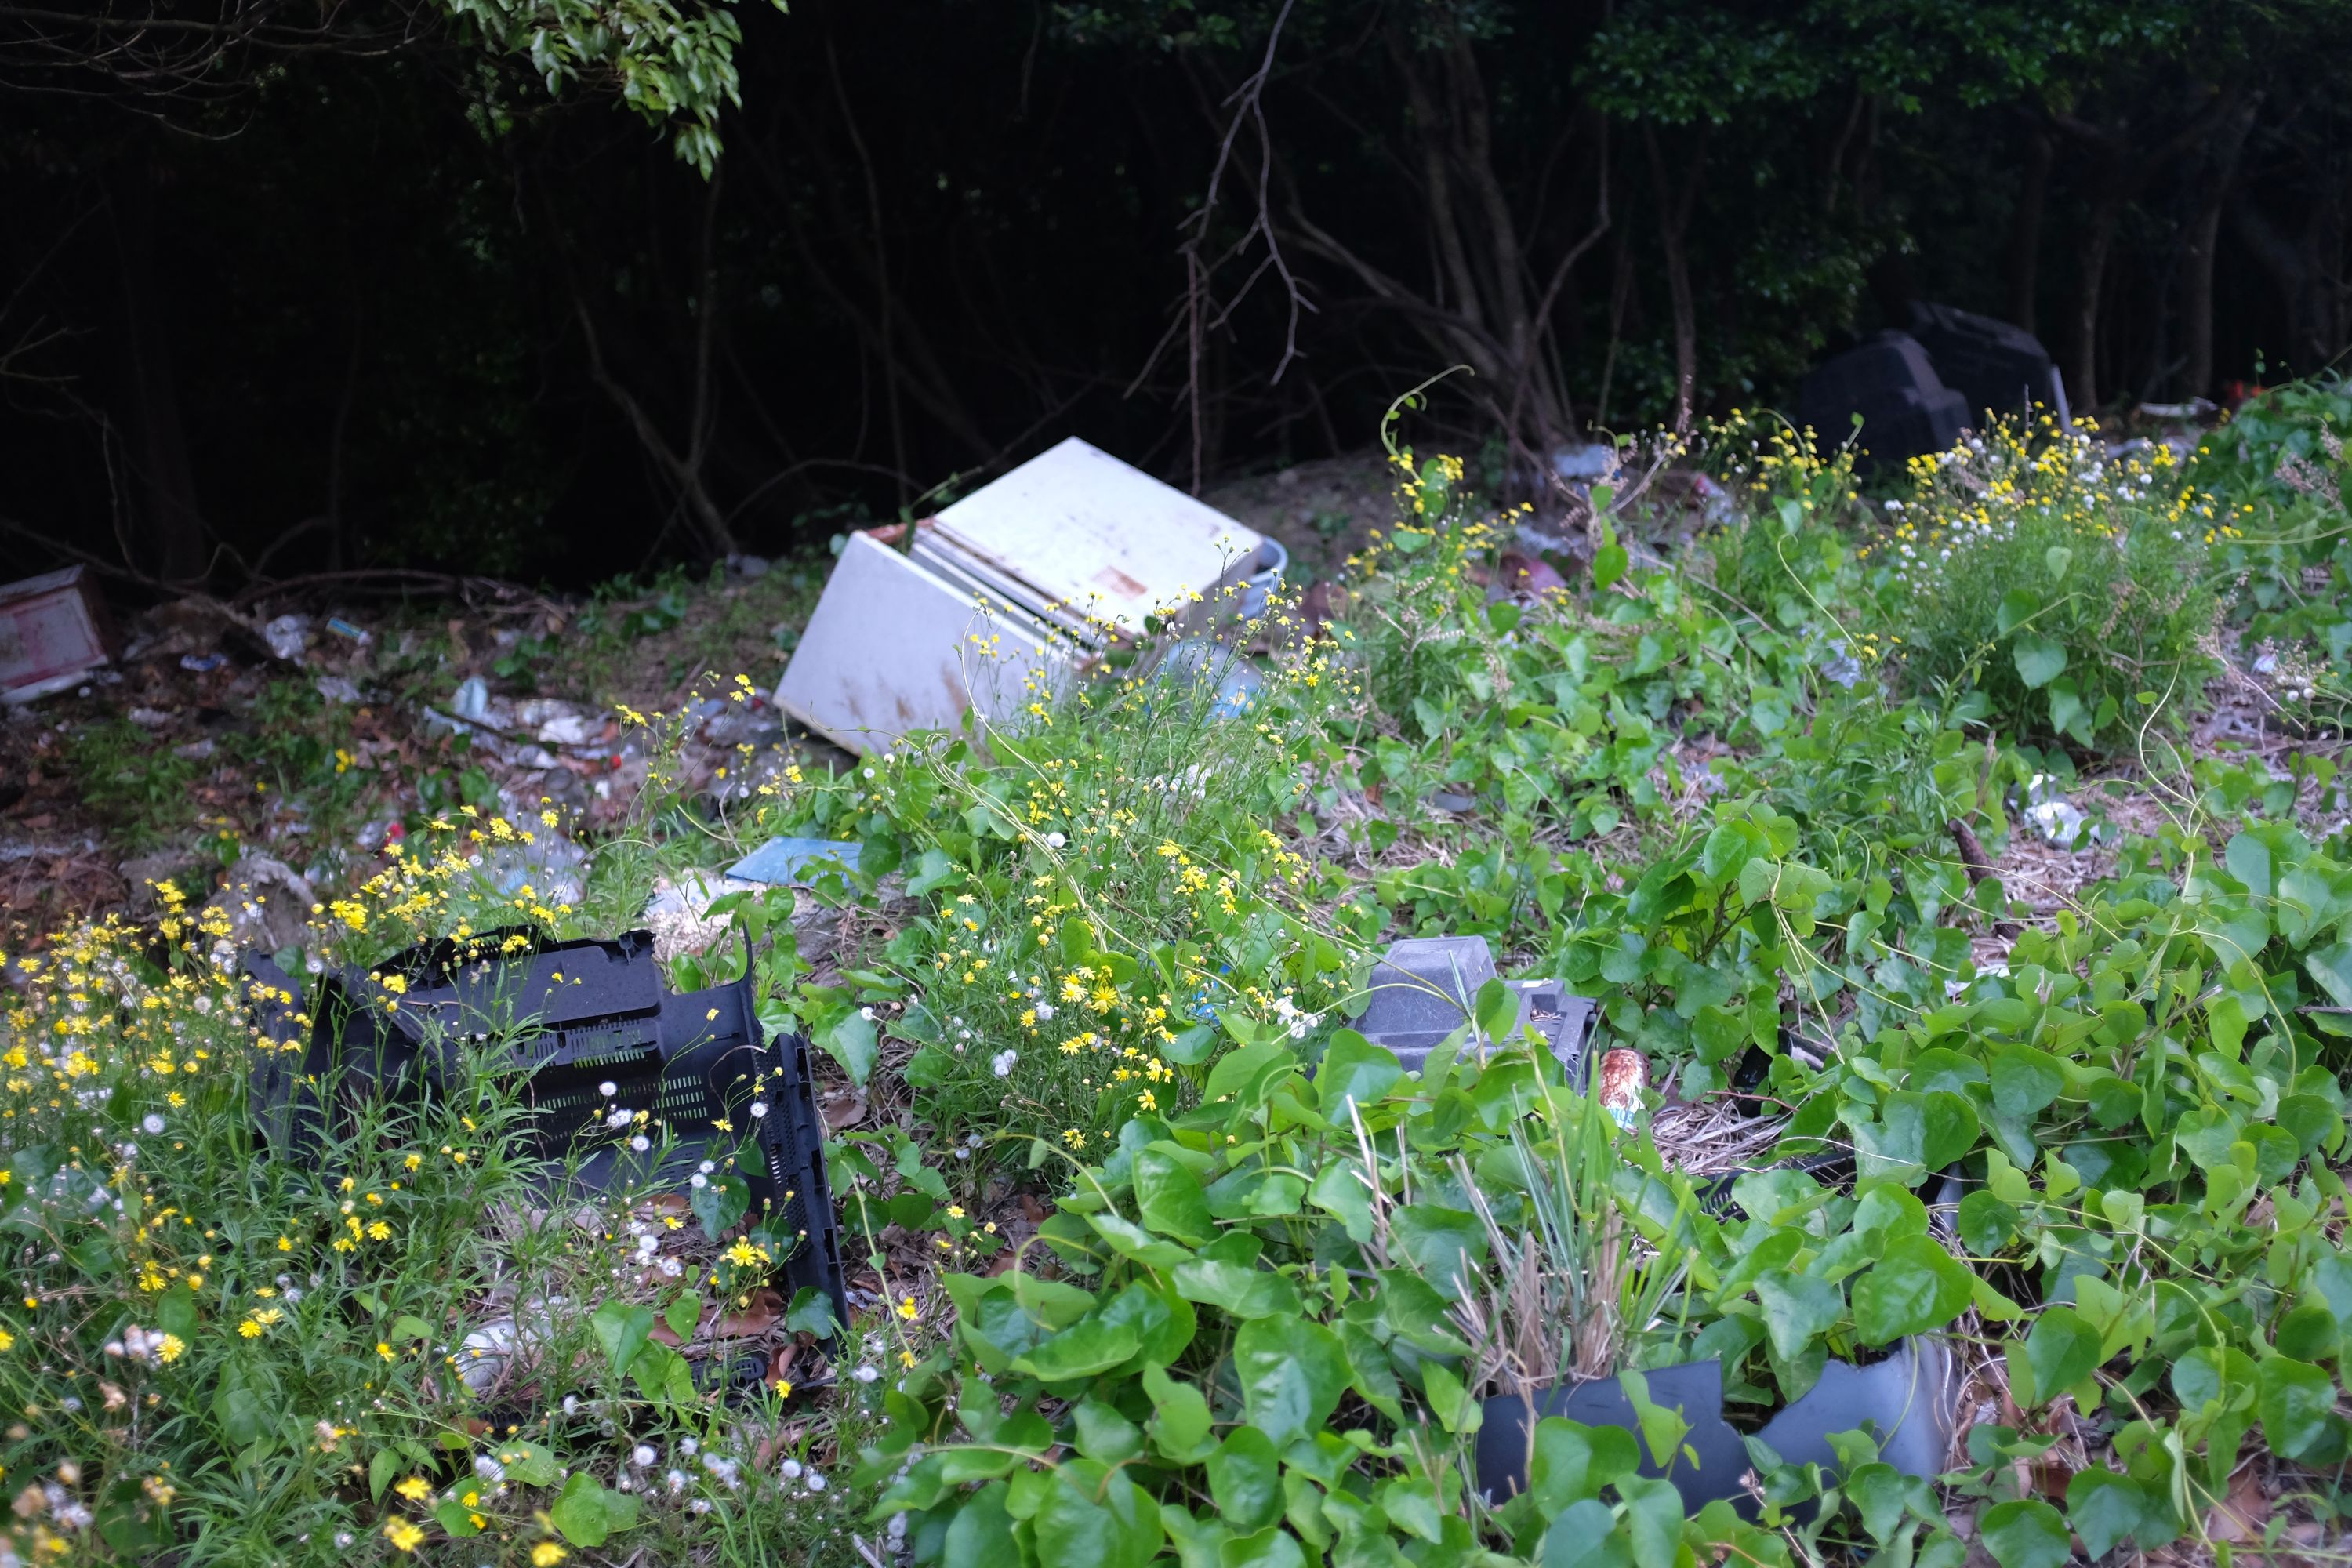 Discarded appliances, like a TV and a refrigerator, poke out of the flowering undergrowth.